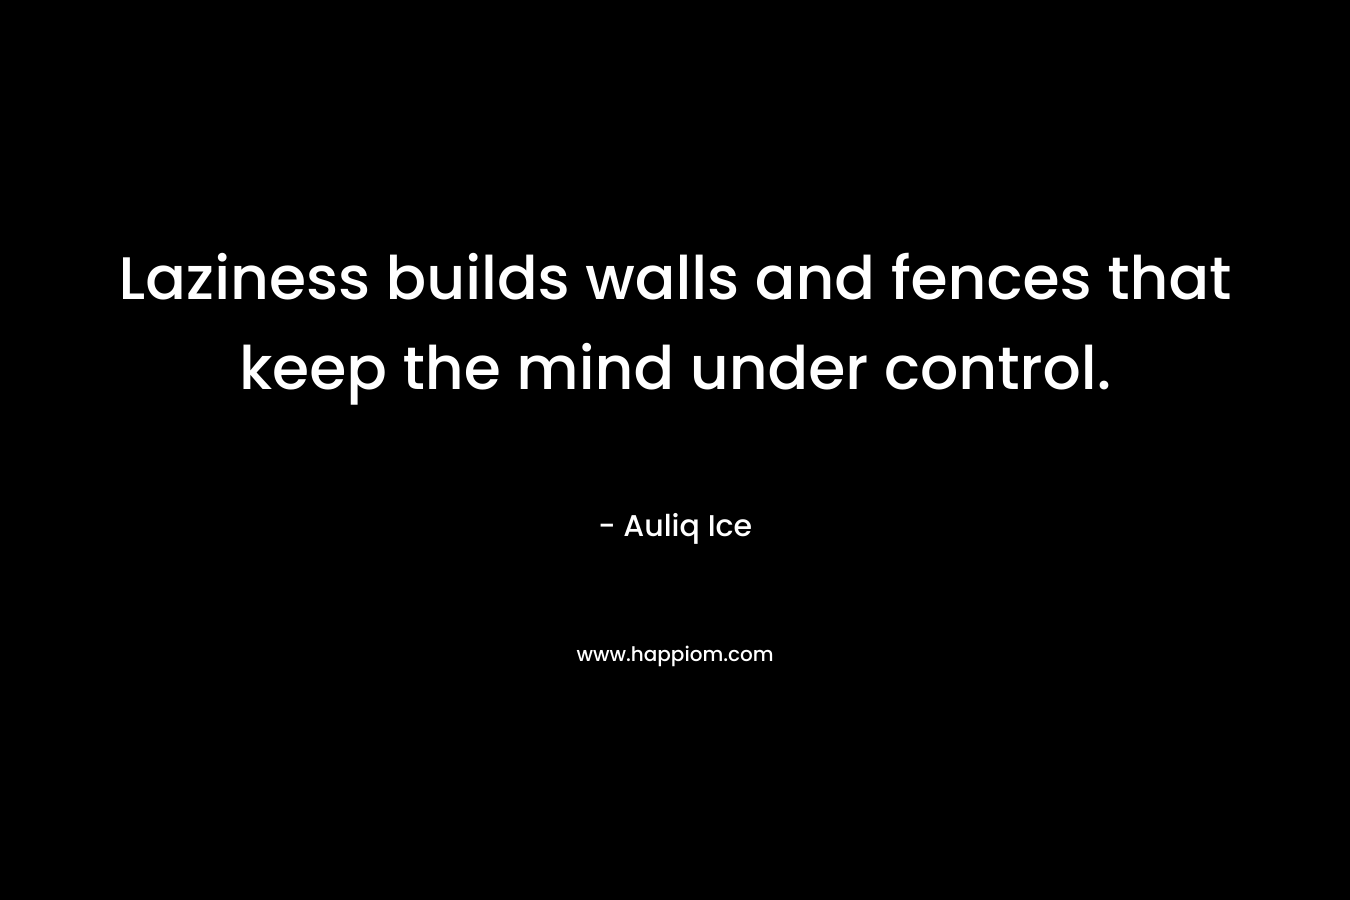 Laziness builds walls and fences that keep the mind under control. – Auliq Ice